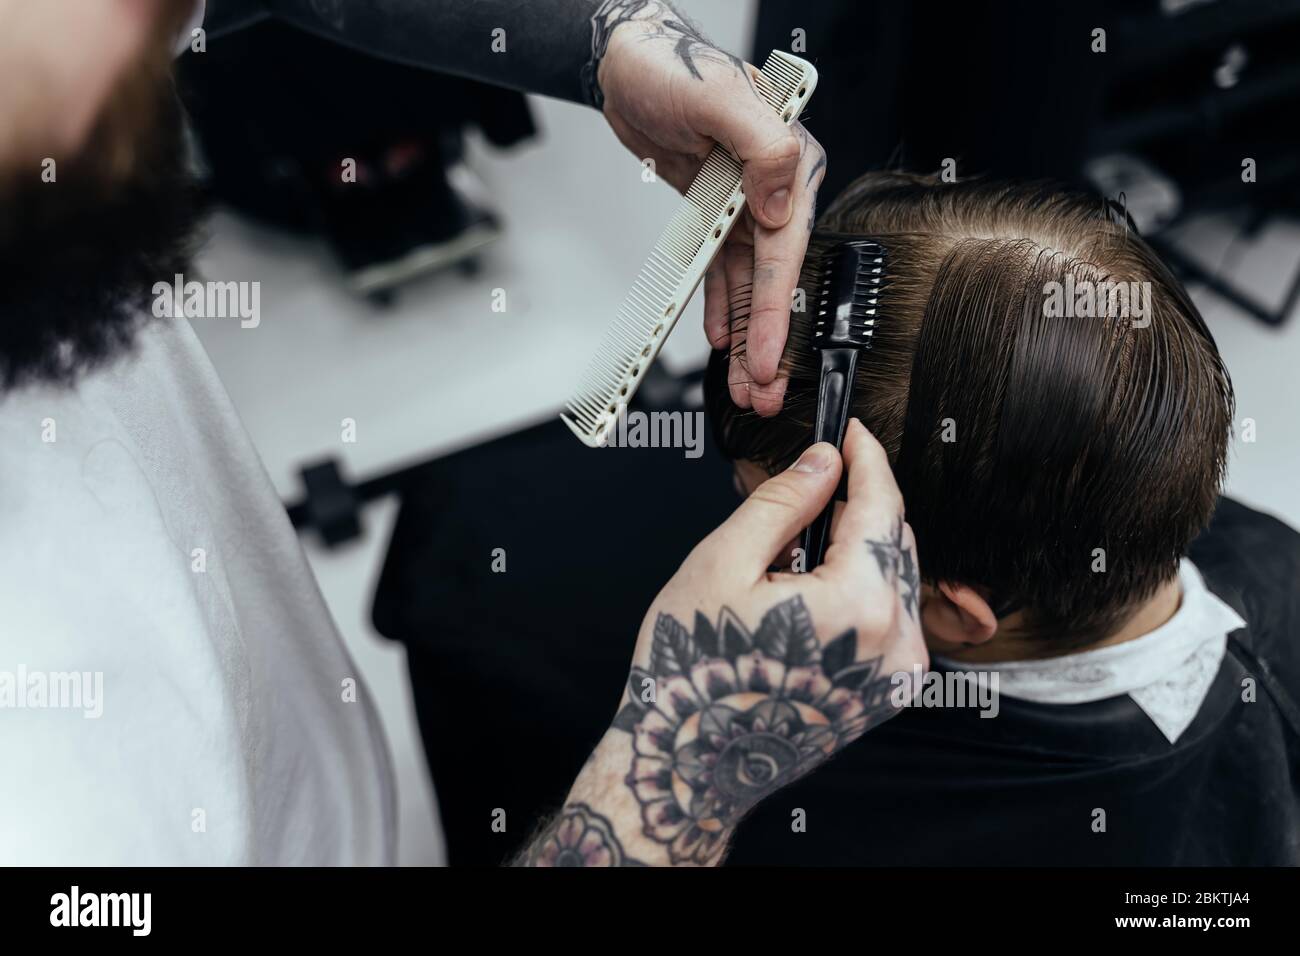 Professional tattooed barber using cutthroat razor cutting hair. Attractive male is getting a modern haircut in barber shop. Close up. Stock Photo